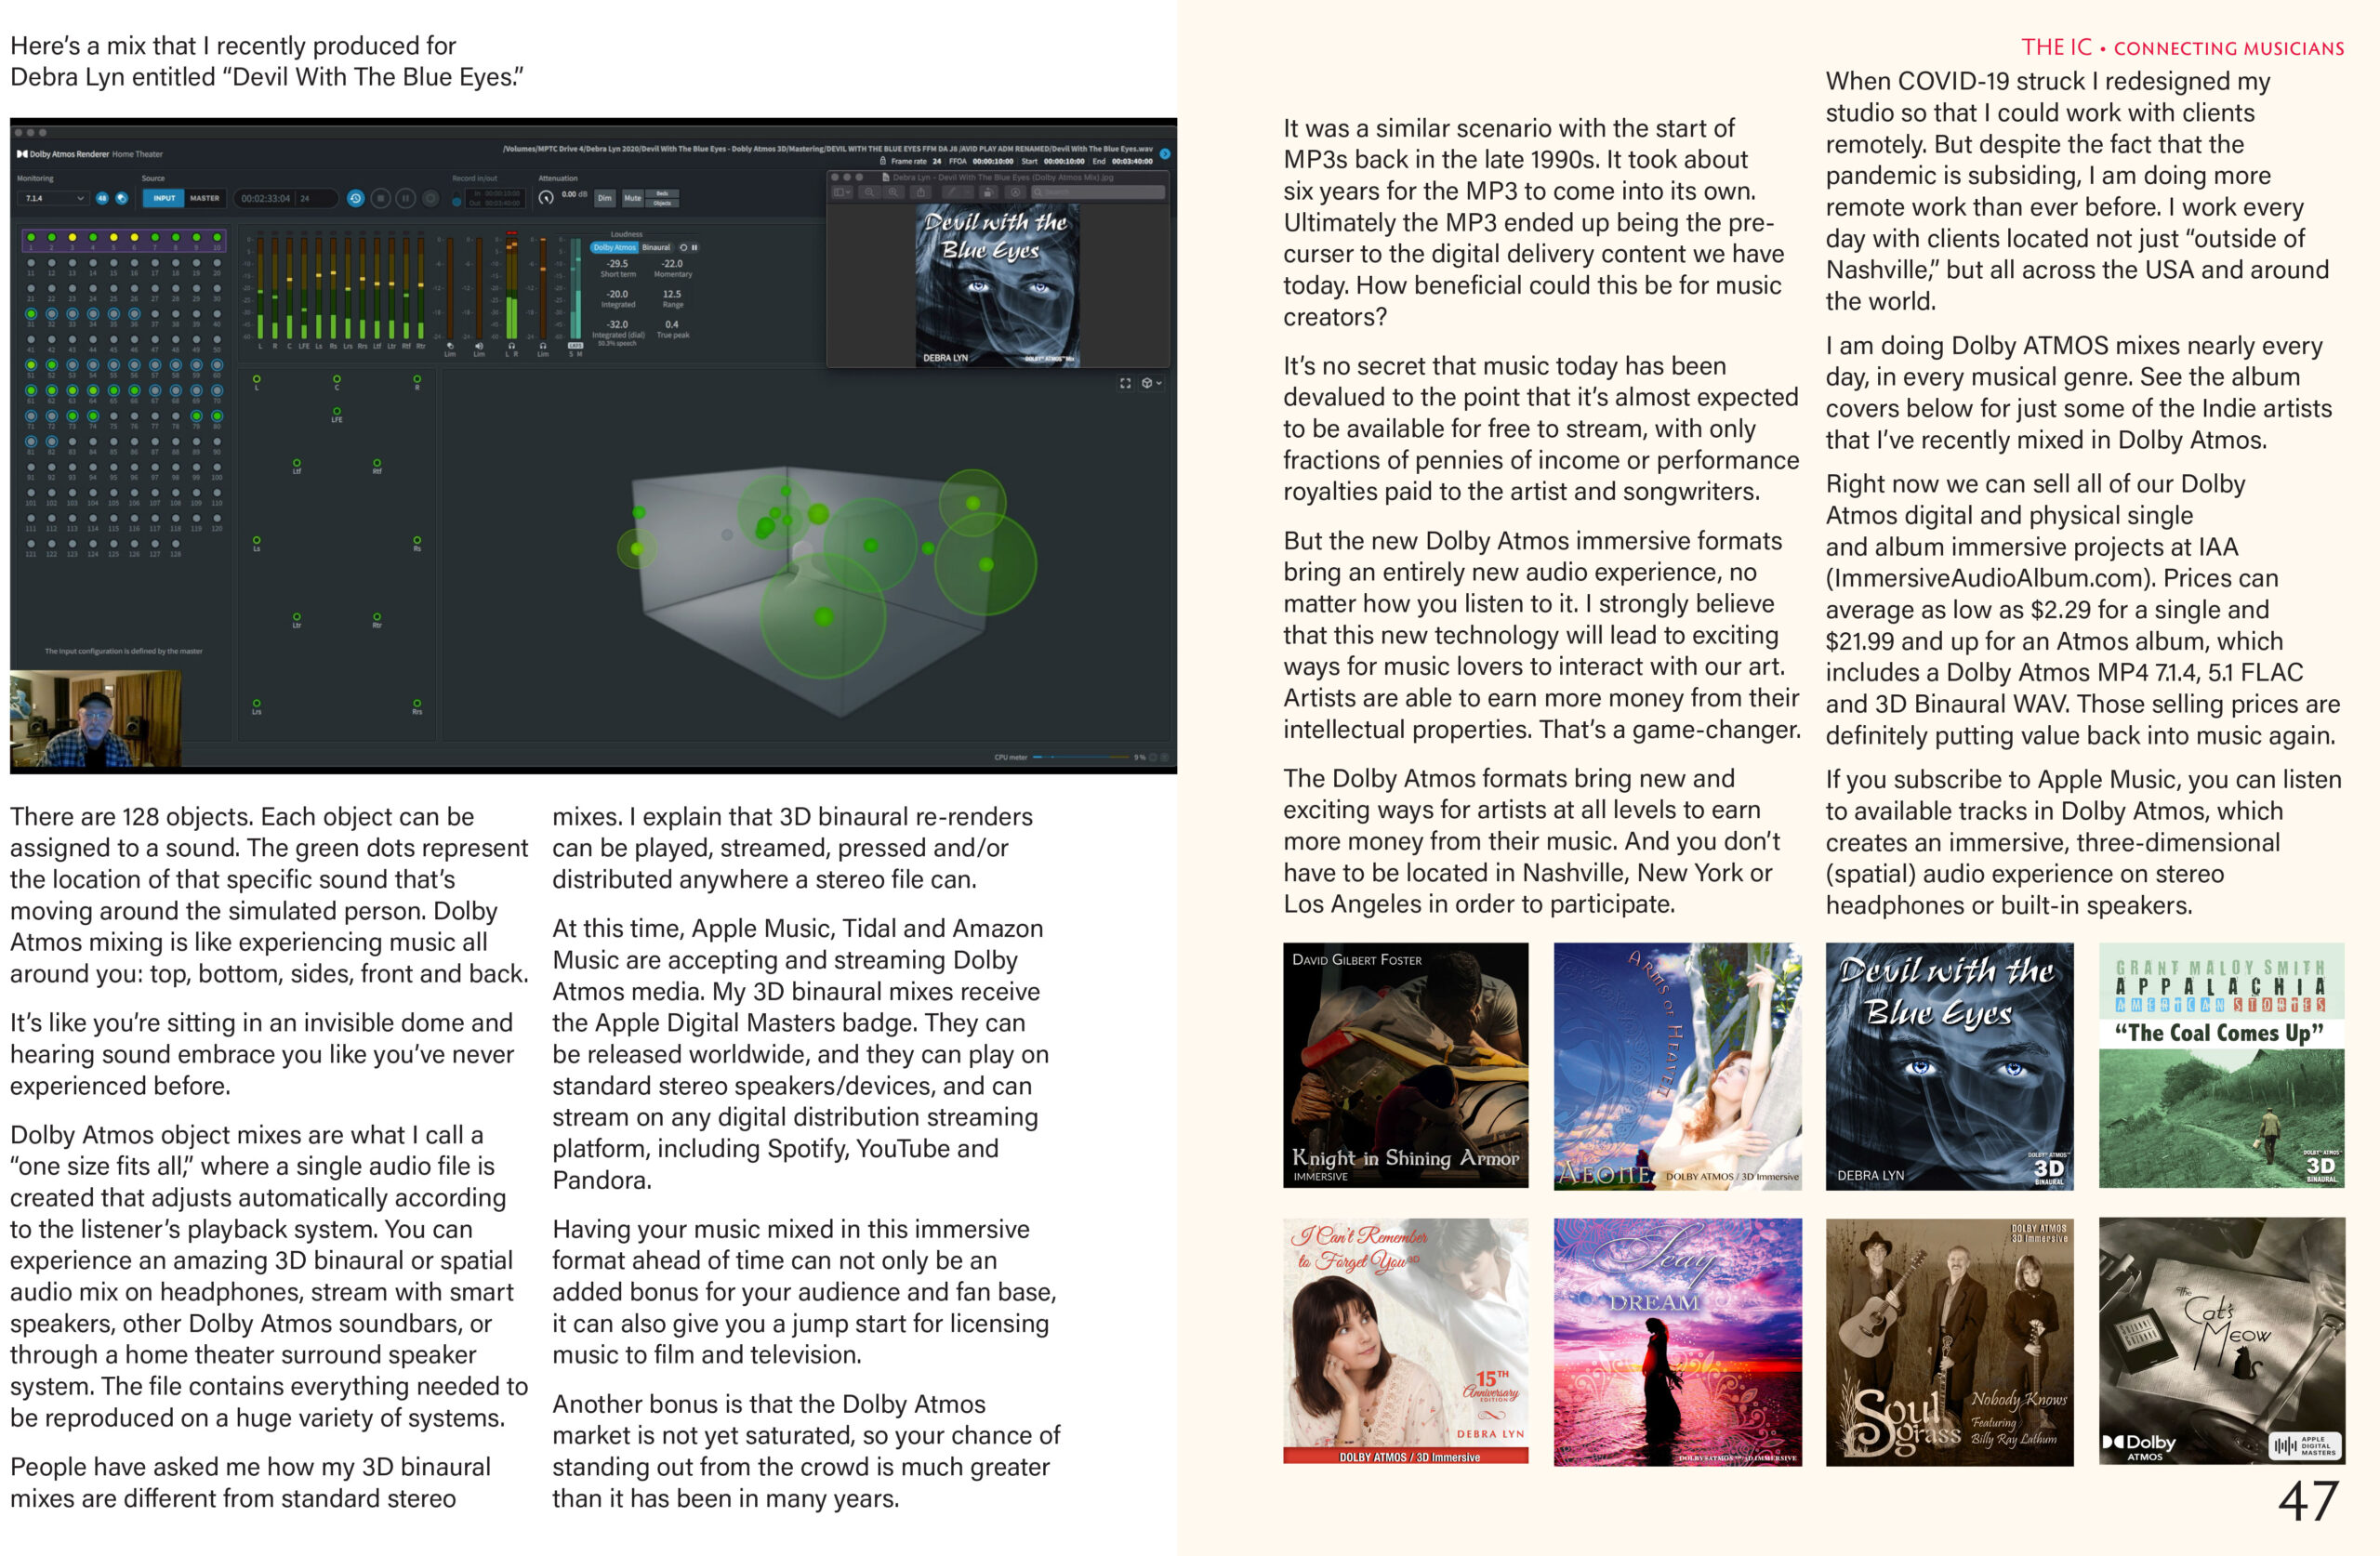 PAGE 2 - WHY DOLBY ATMOS -JEFF SILVERMAN - THE IC 2022 Article - PALETTE MUSIC STUDIO PRODUCTIONS- NASHVILLE TN